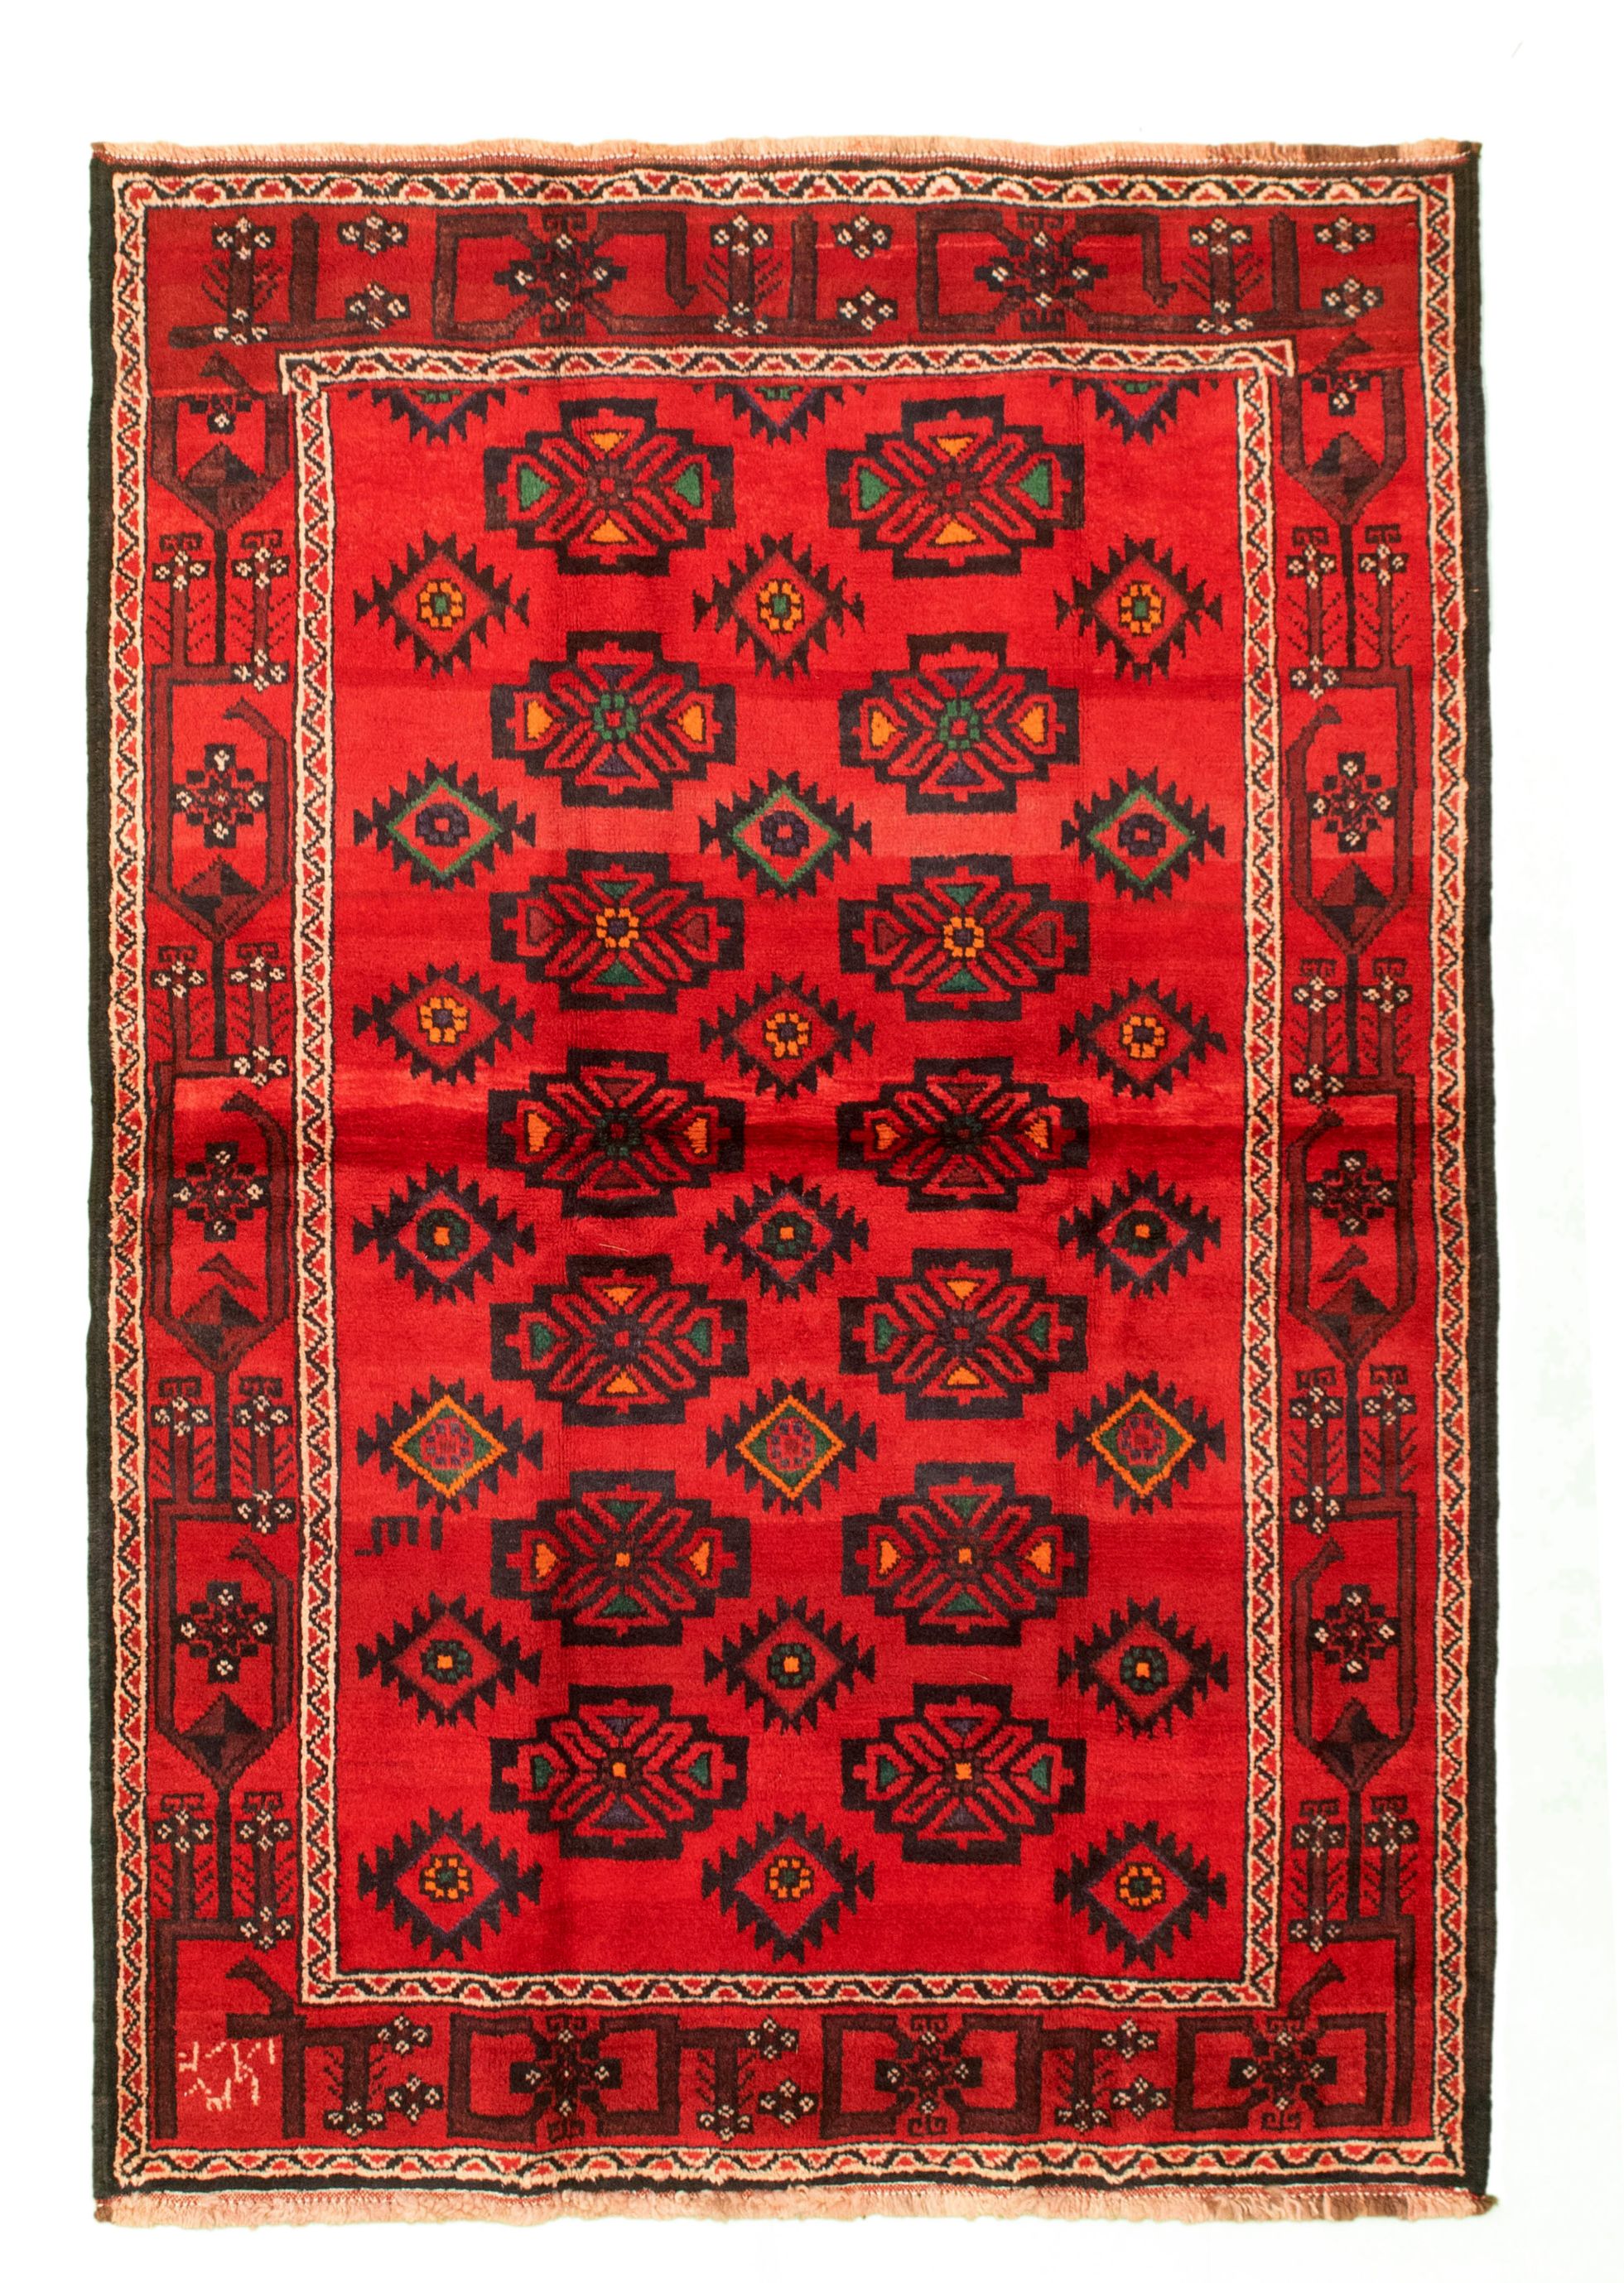 Hand-knotted Authentic Turkish Red Wool Rug 4'10" x 6'11" Size: 4'10" x 6'11"  